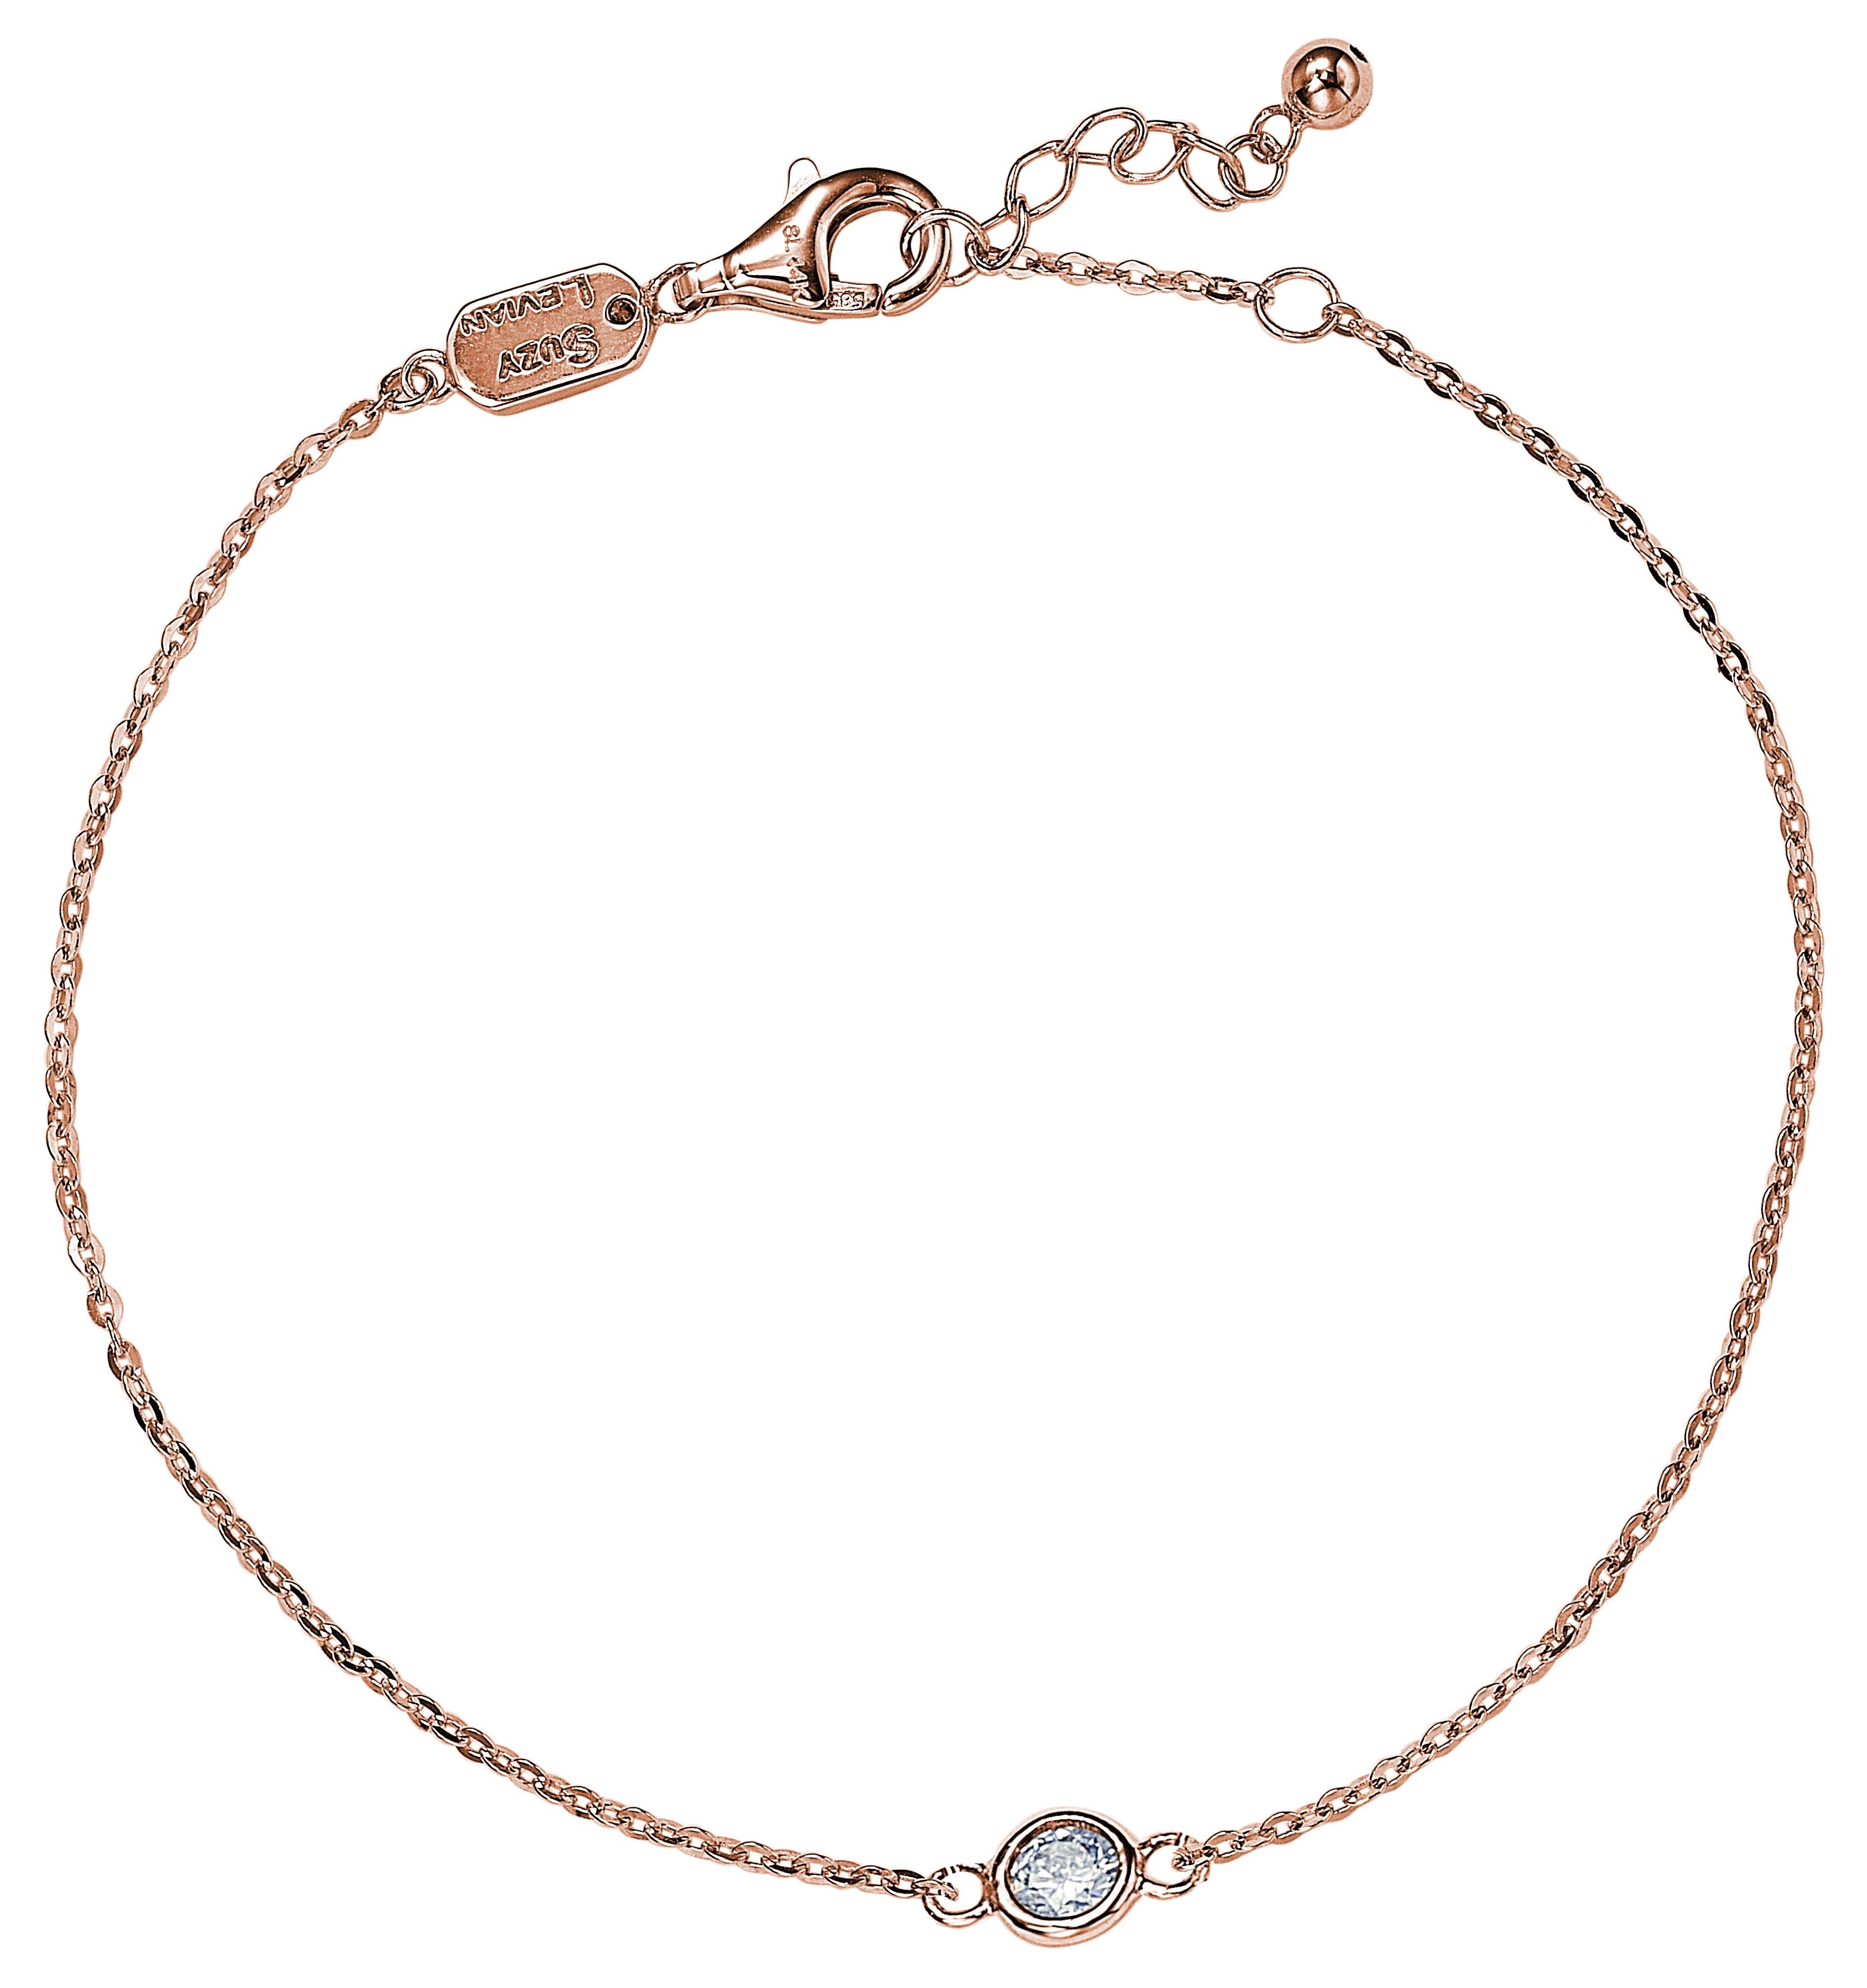 Add some sparkle to your wrist with this beautiful diamond solitaire bracelet by Suzy Levian. This magnificent bracelet boasts a brilliant round-cut diamond in an exquisite bezel adorned of 14-karat rose gold. This bracelet features a high polish